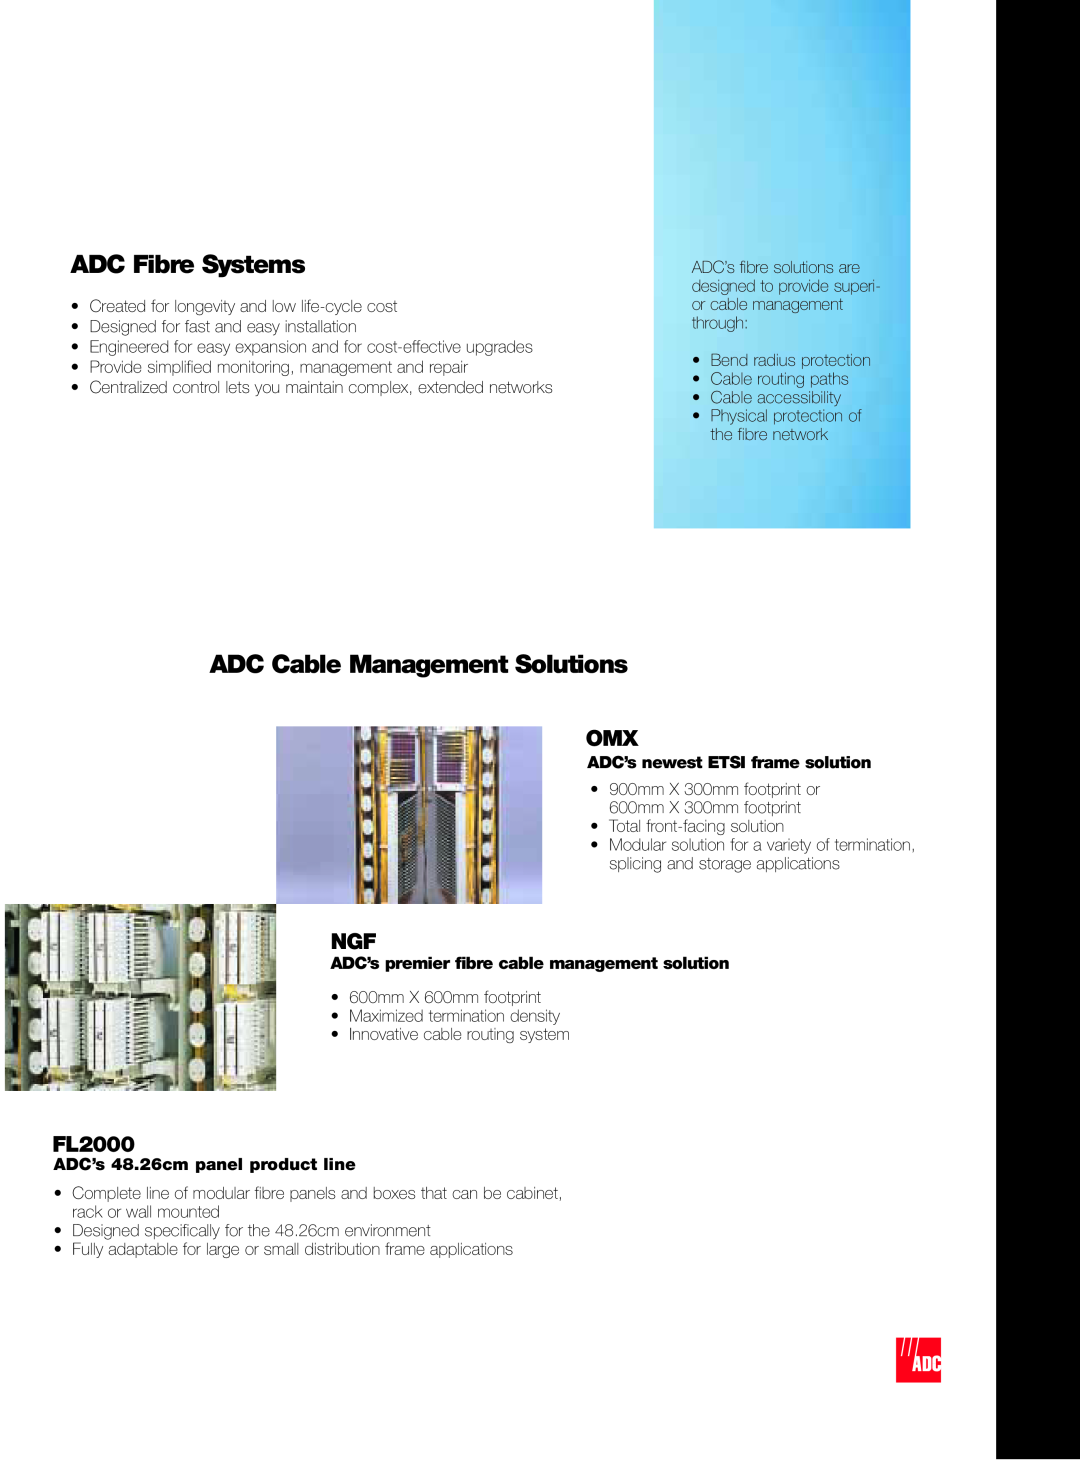 ADC Fibre ETSI Solution manual ADC Fibre Systems, ADC Cable Management Solutions, ADC’s newest ETSI frame solution, FL2000 